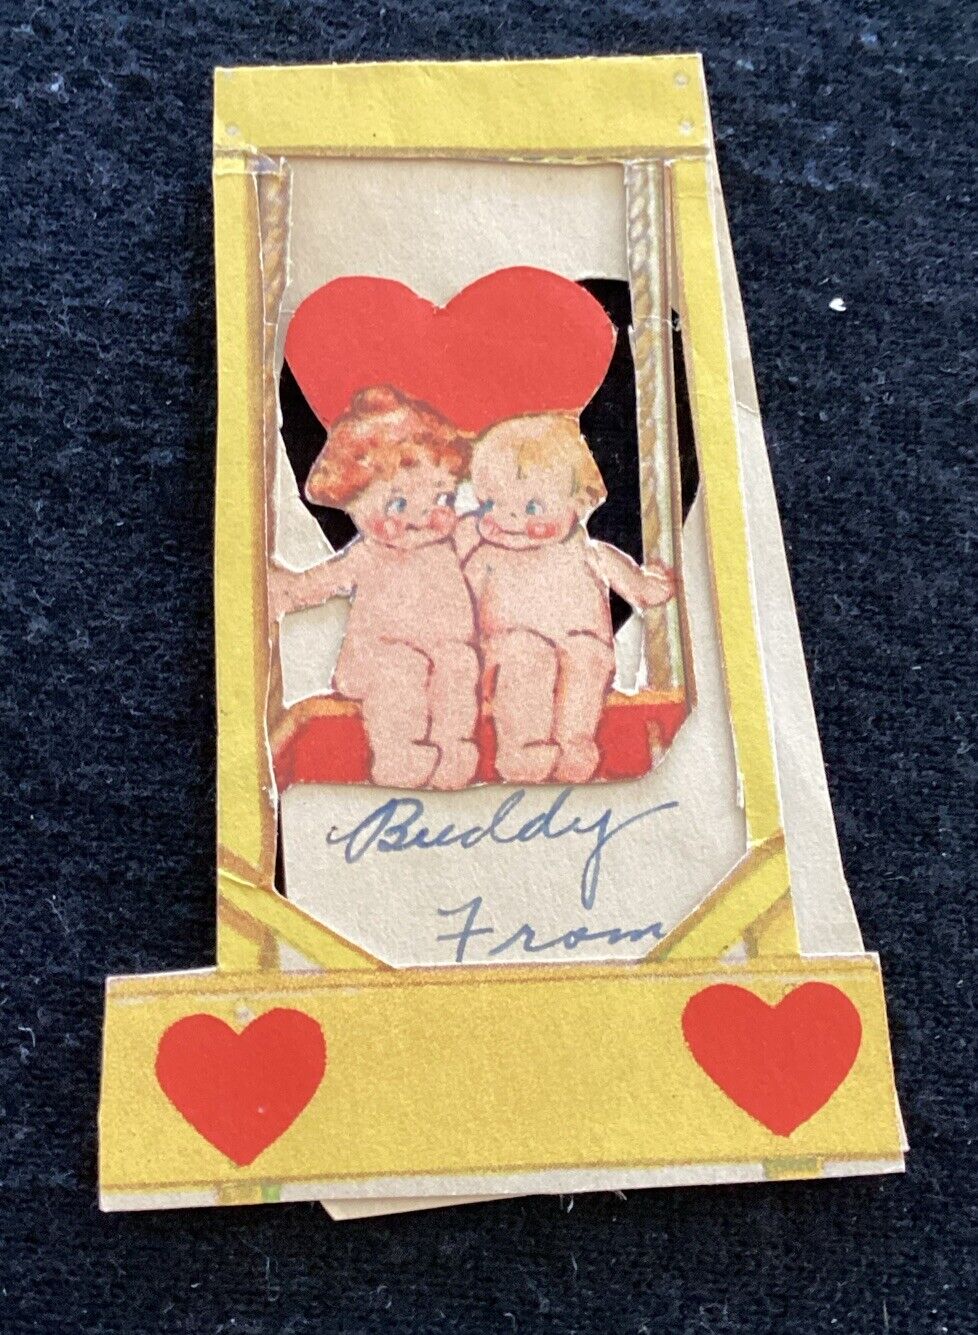 RARE Kewpie Doll 1930S Valentine’s Day Greeting Card - On Swing Hearts Vintage